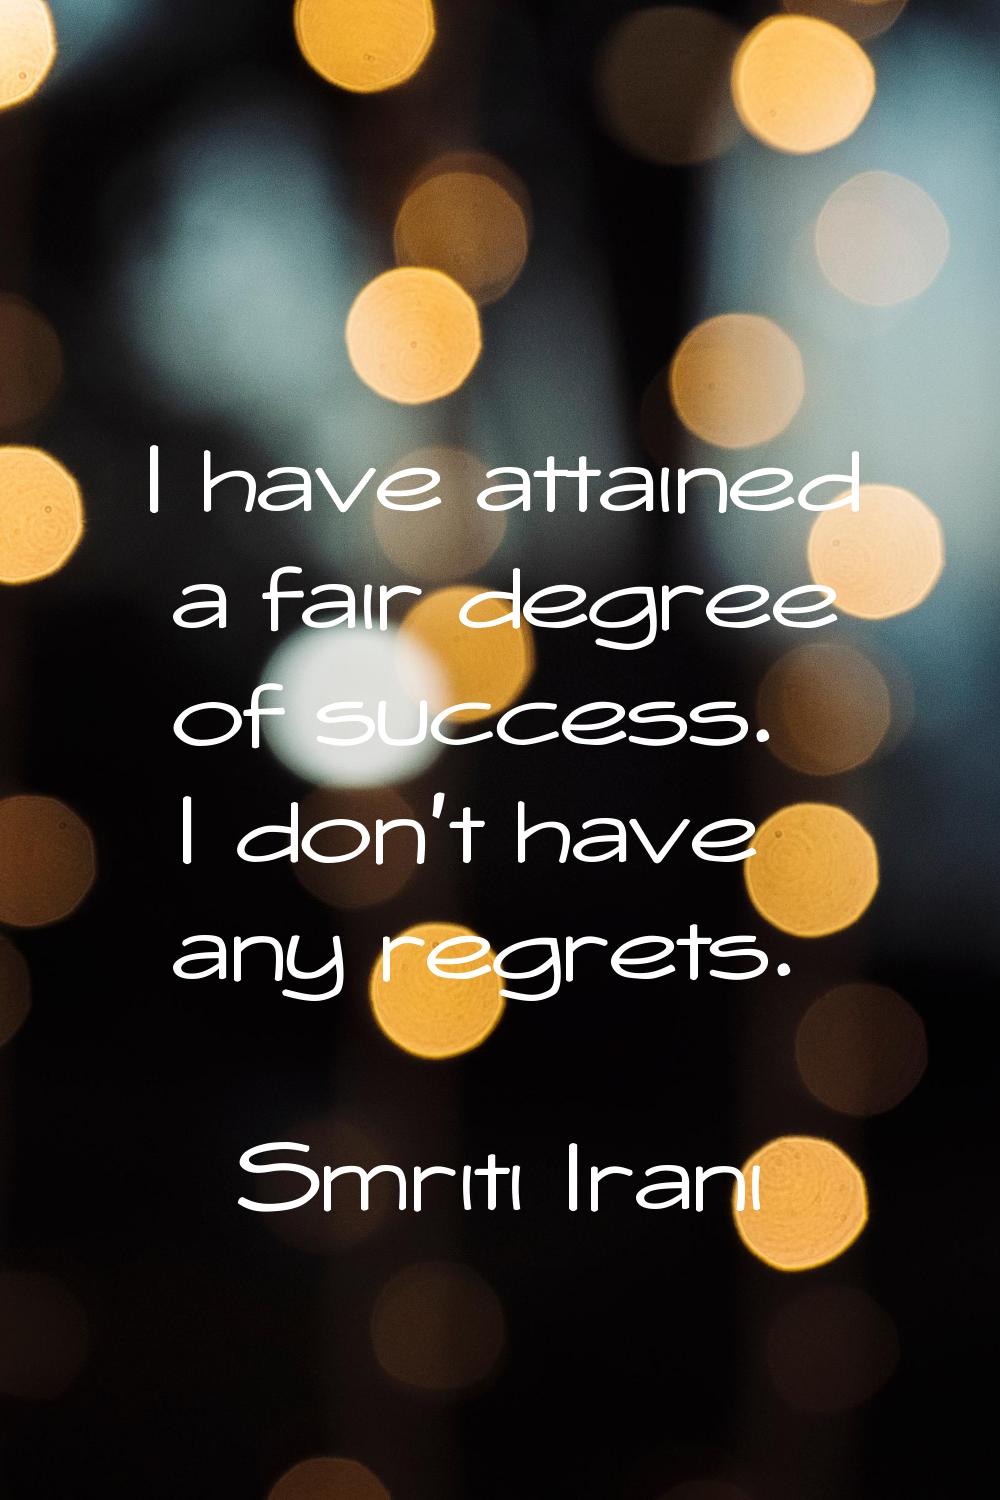 I have attained a fair degree of success. I don't have any regrets.